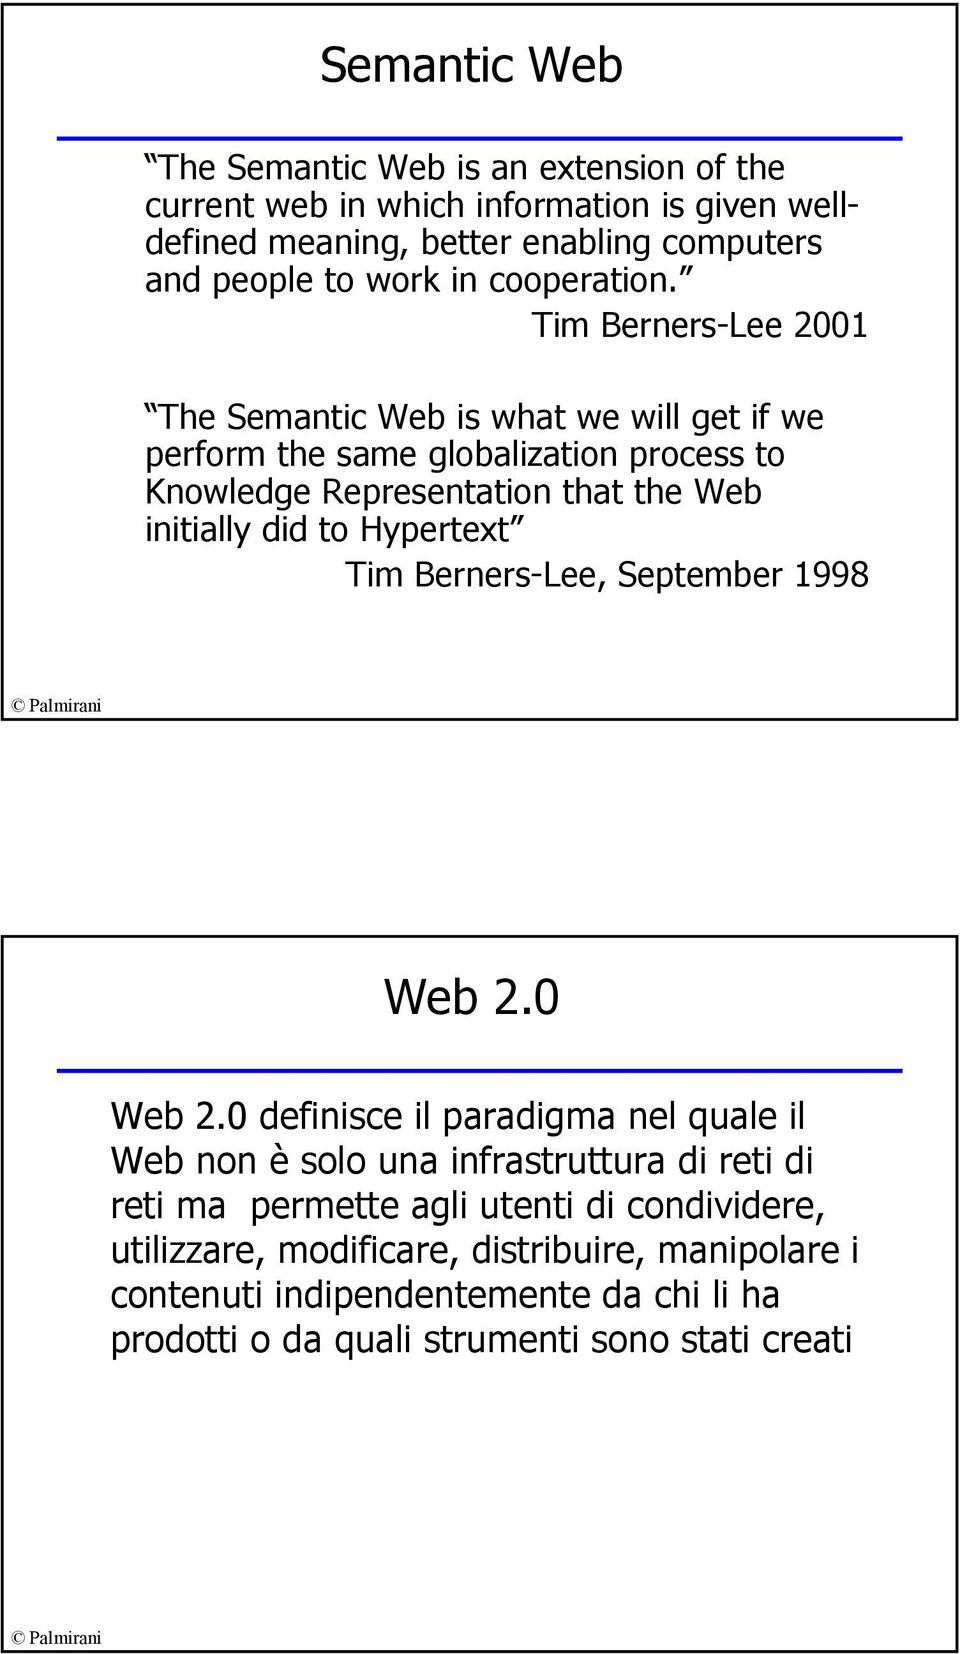 Tim Berners-Lee 2001 The Semantic Web is what we will get if we perform the same globalization process to Knowledge Representation that the Web initially did to